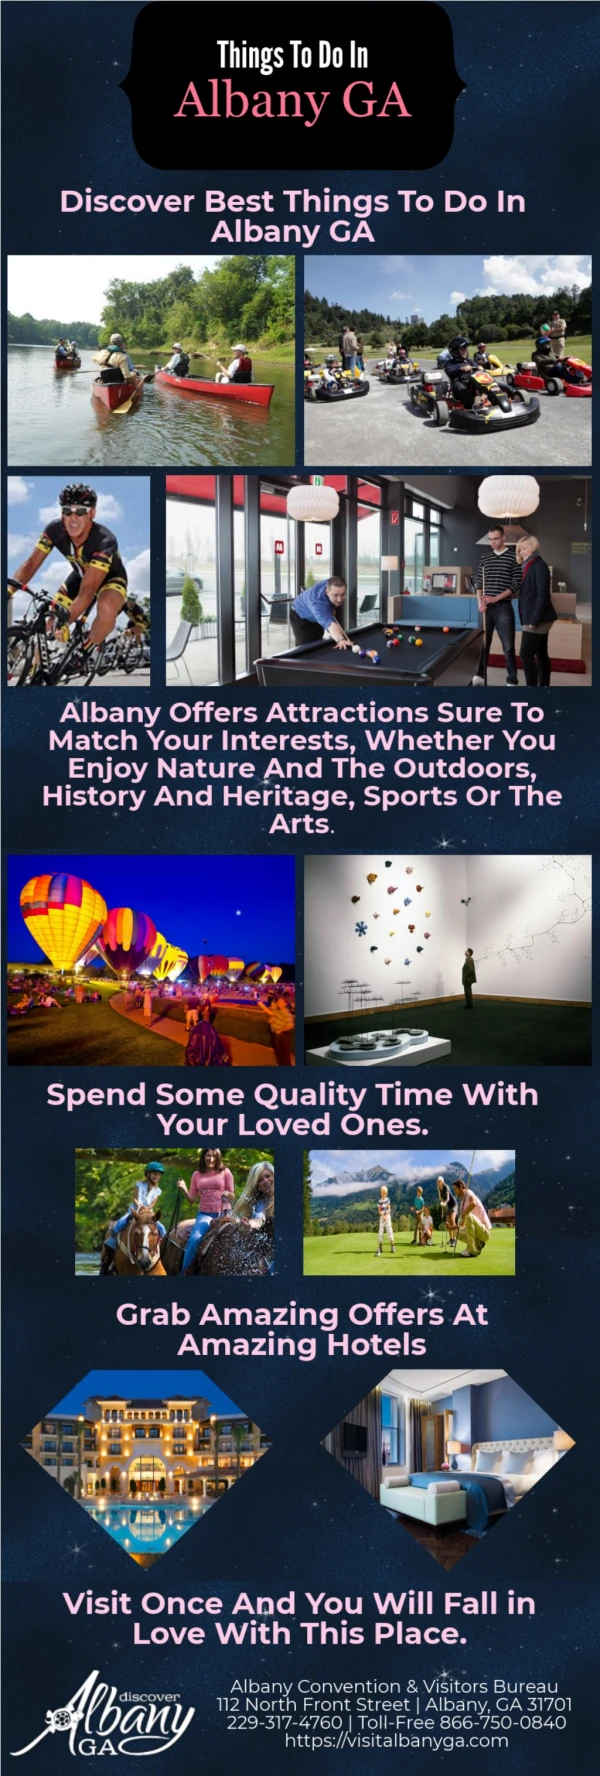 Explore Things To Do In Albany GA